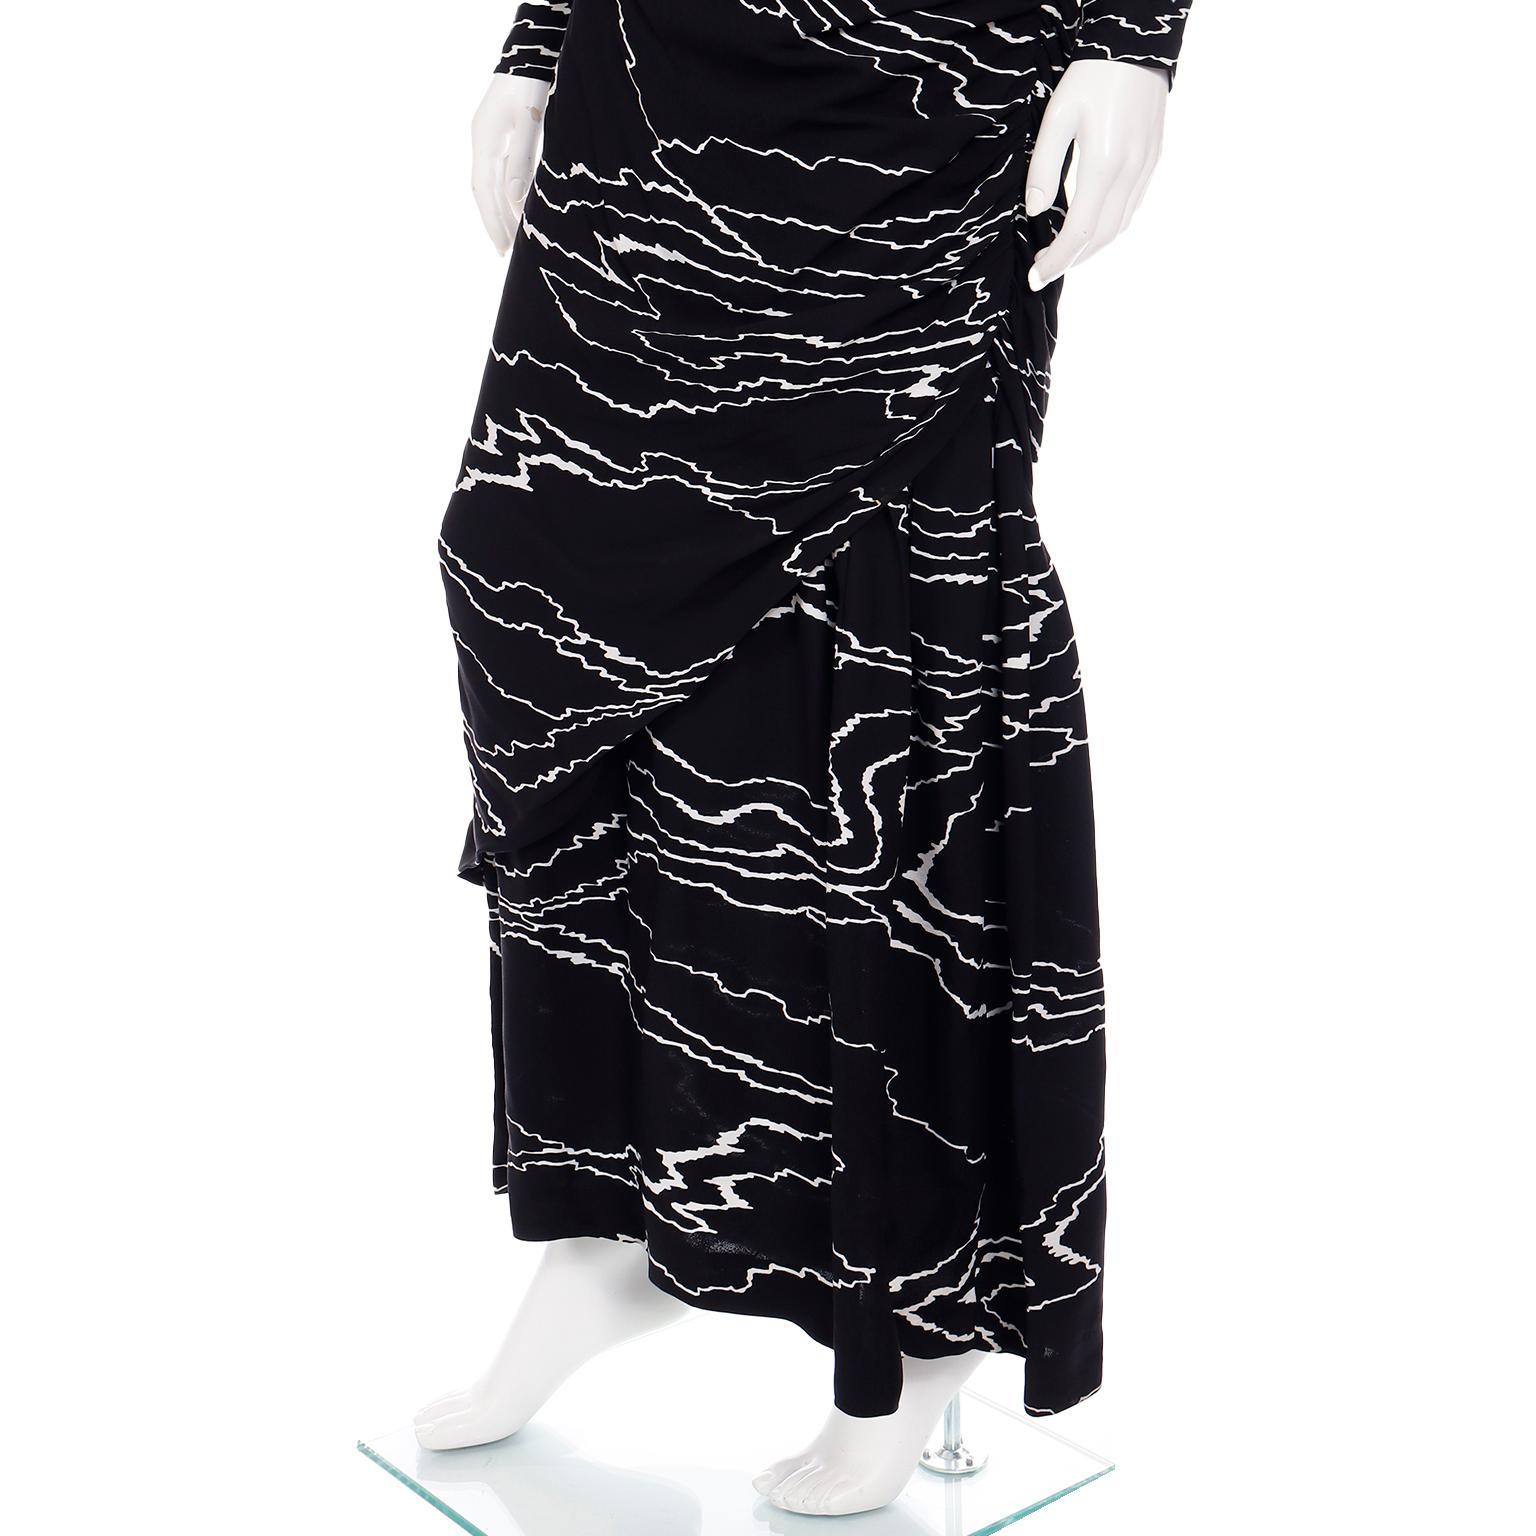 1985 Bill Blass Vintage Runway Dress Abstract Black White Evening Gown Draping For Sale 10